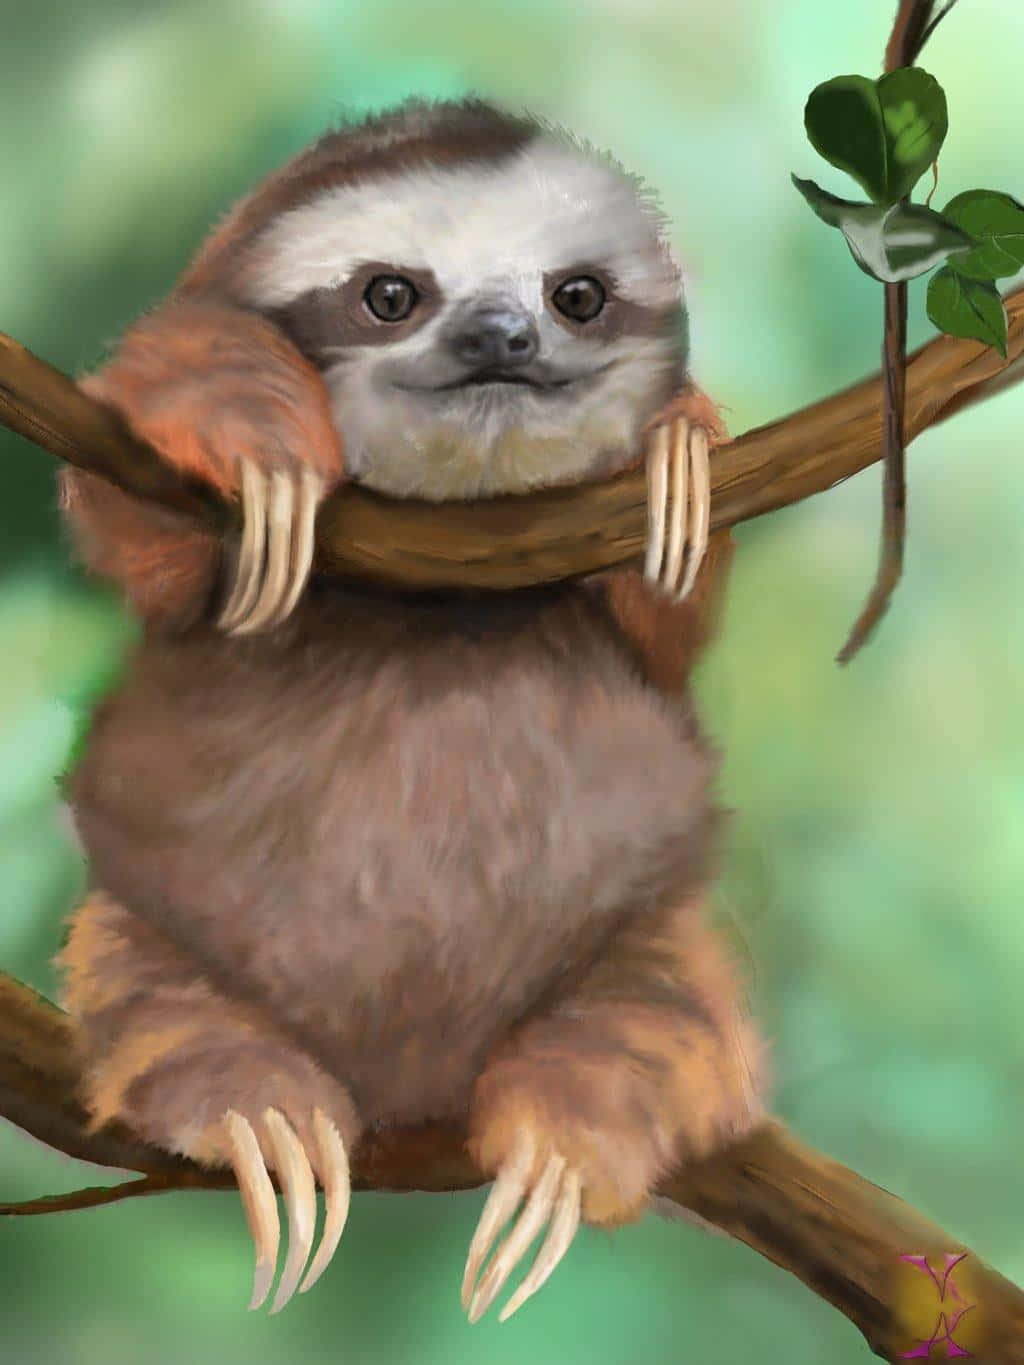 Look At The Adorable Baby Sloth!